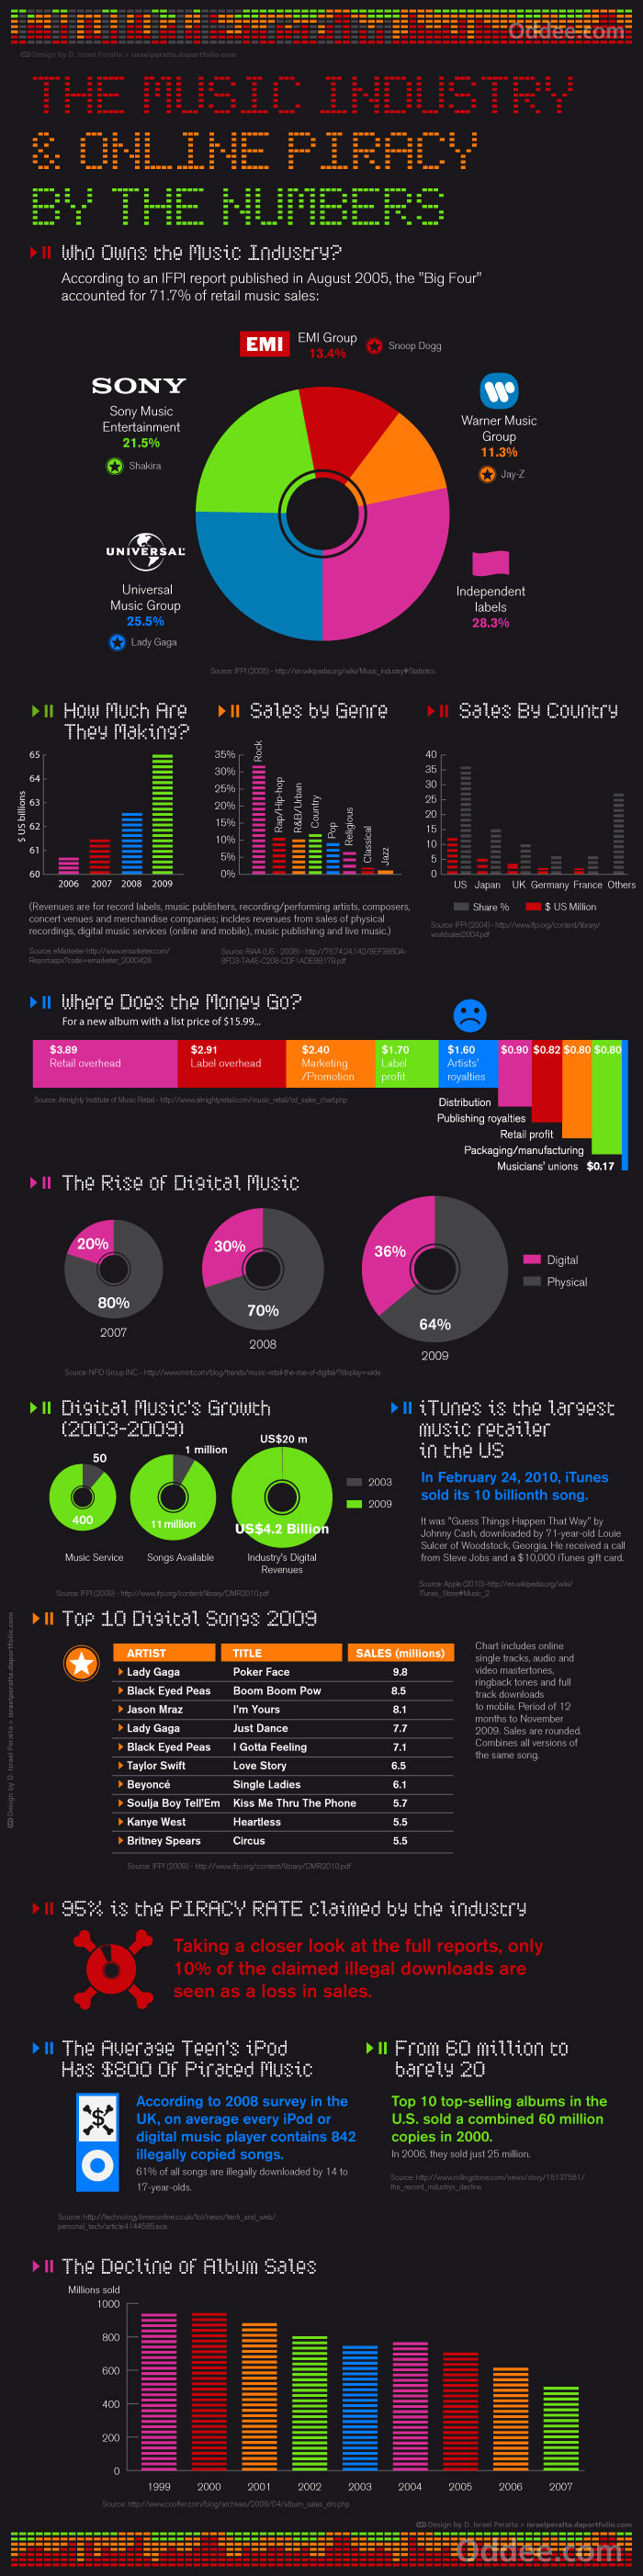 Music And Piracy Infographic